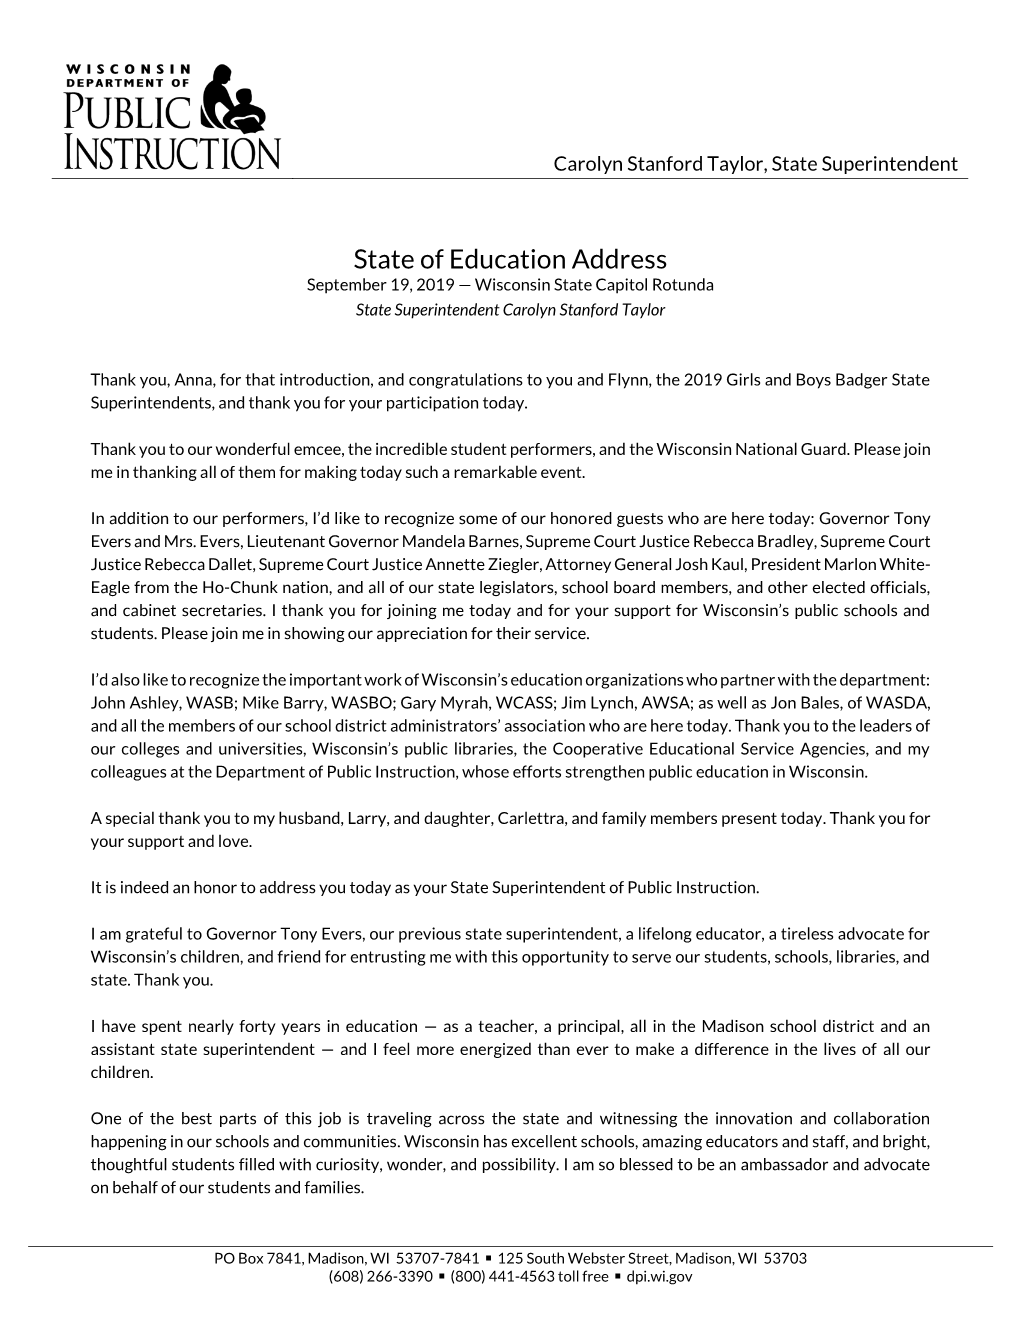 State of Education Address 2019 – Page 2